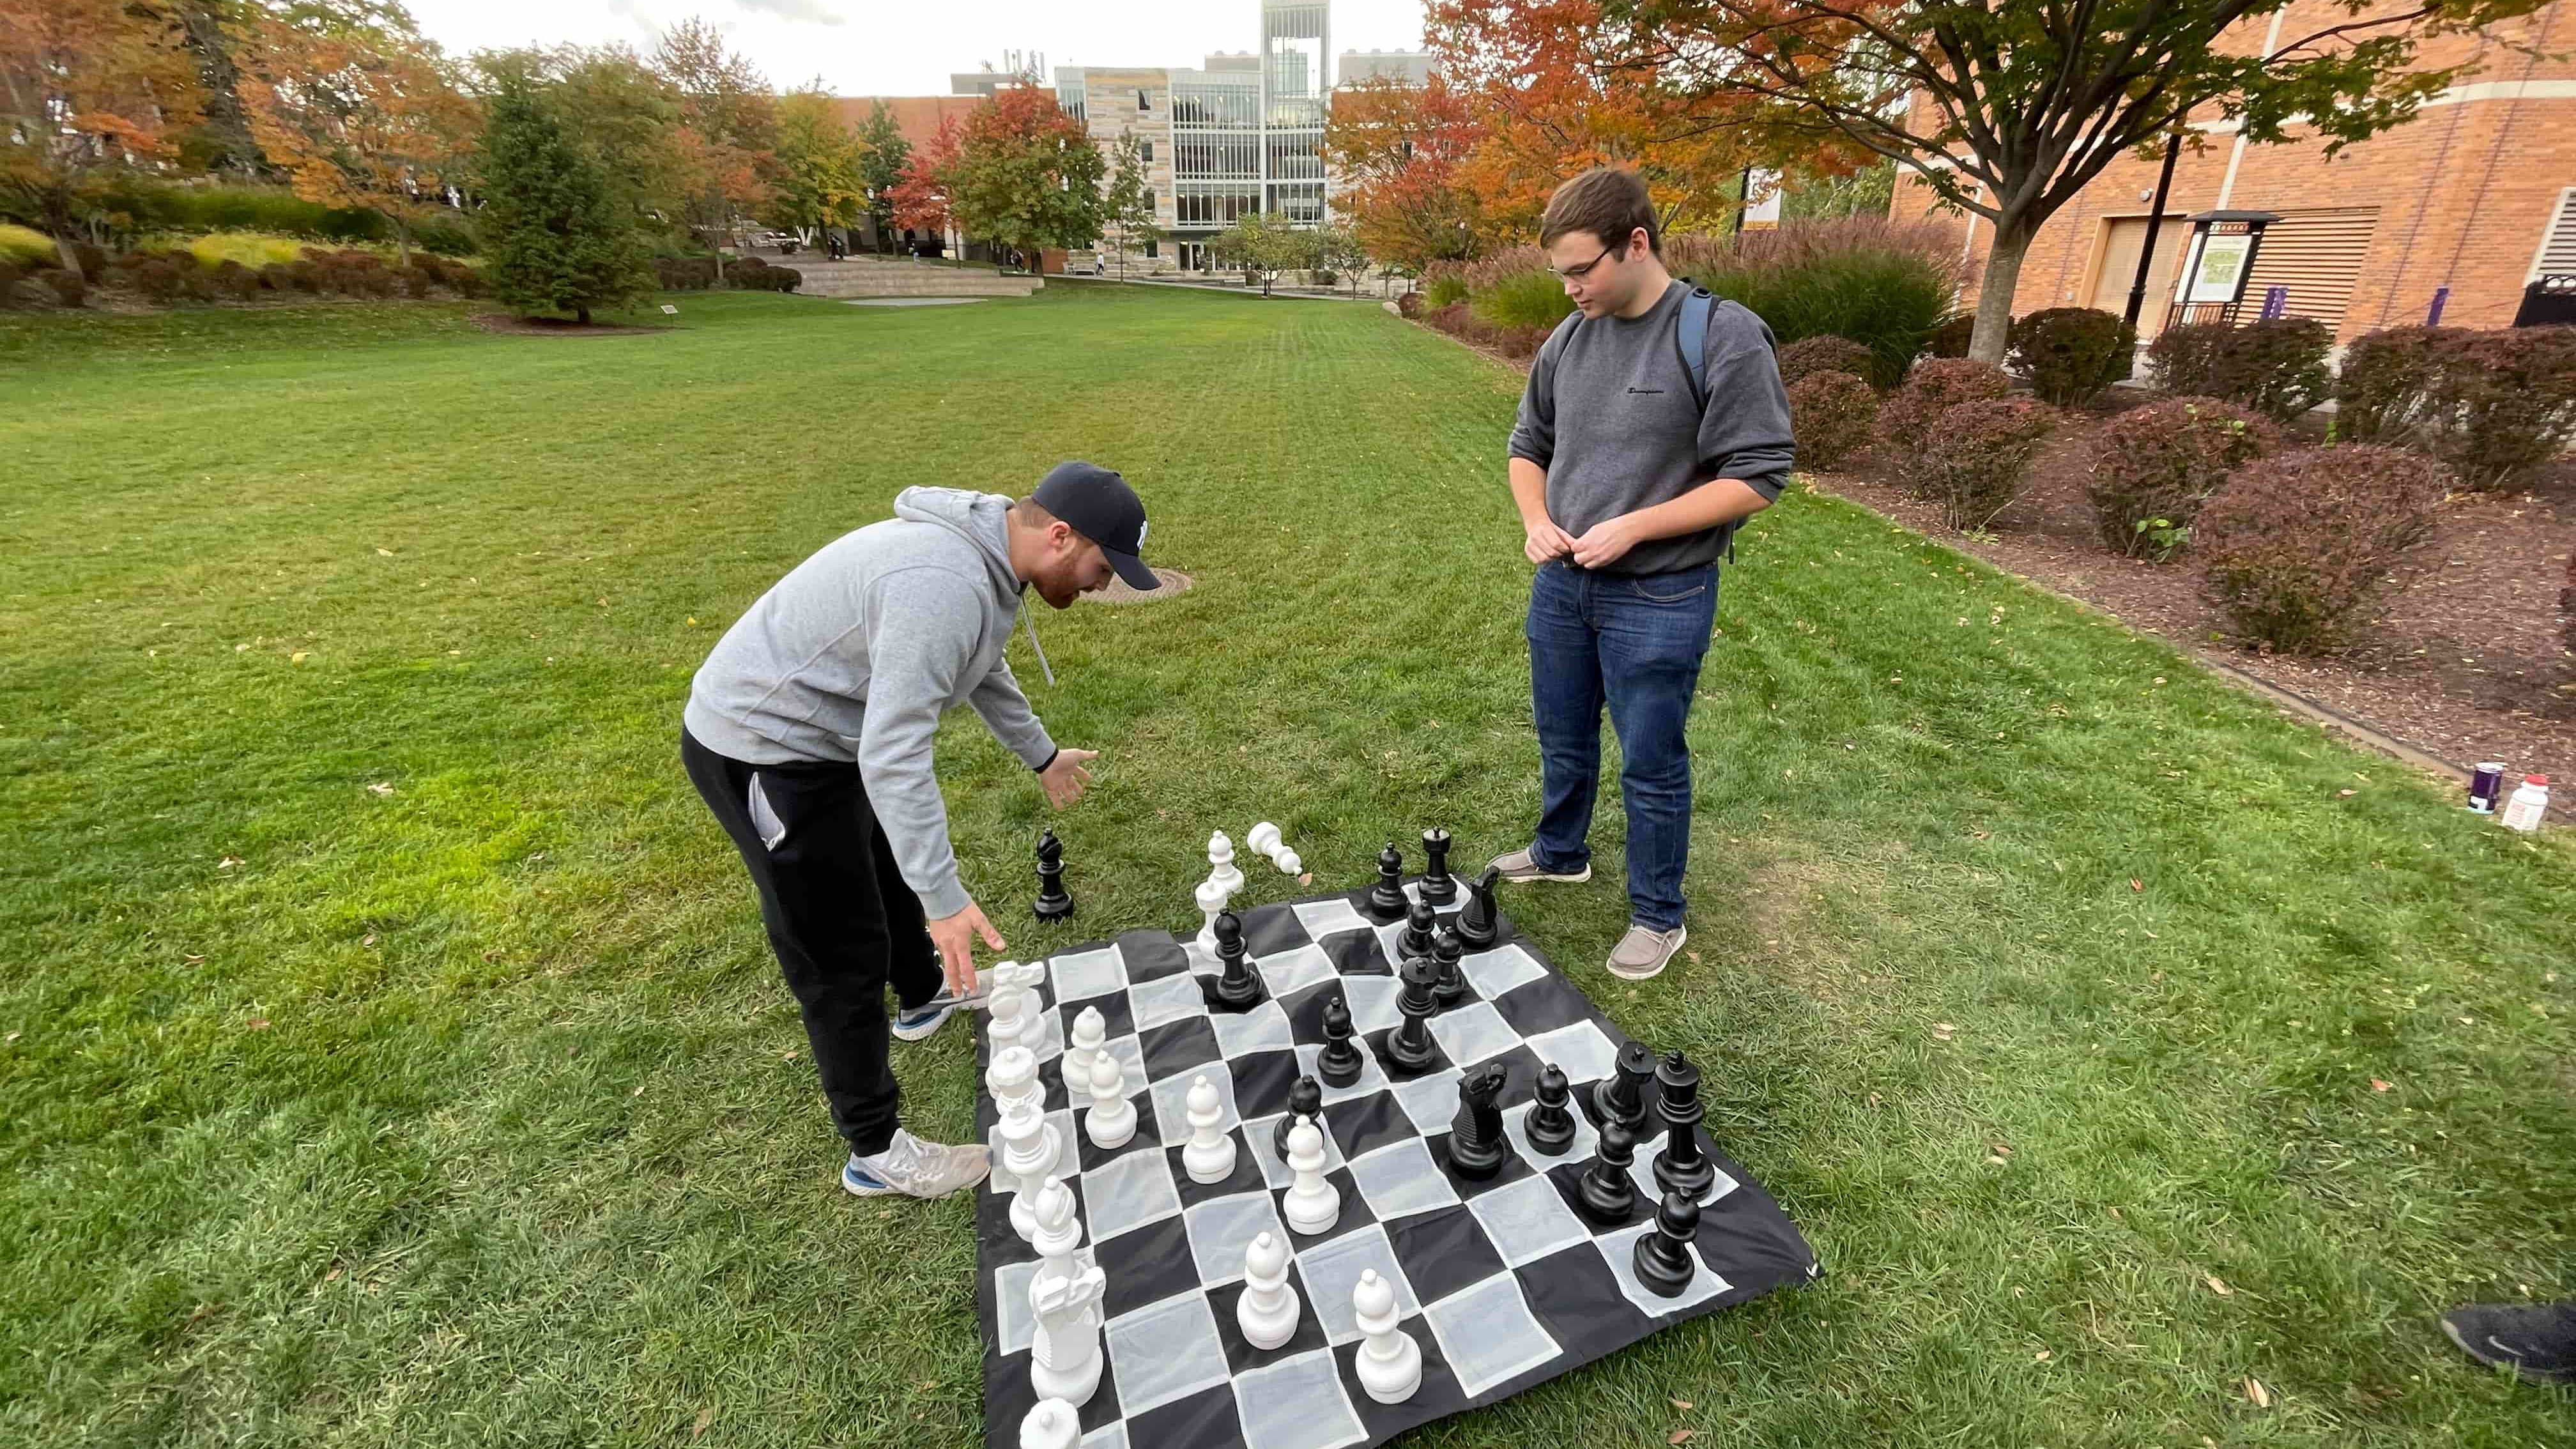 people on a lawn playing chess on a board ten times the regular size